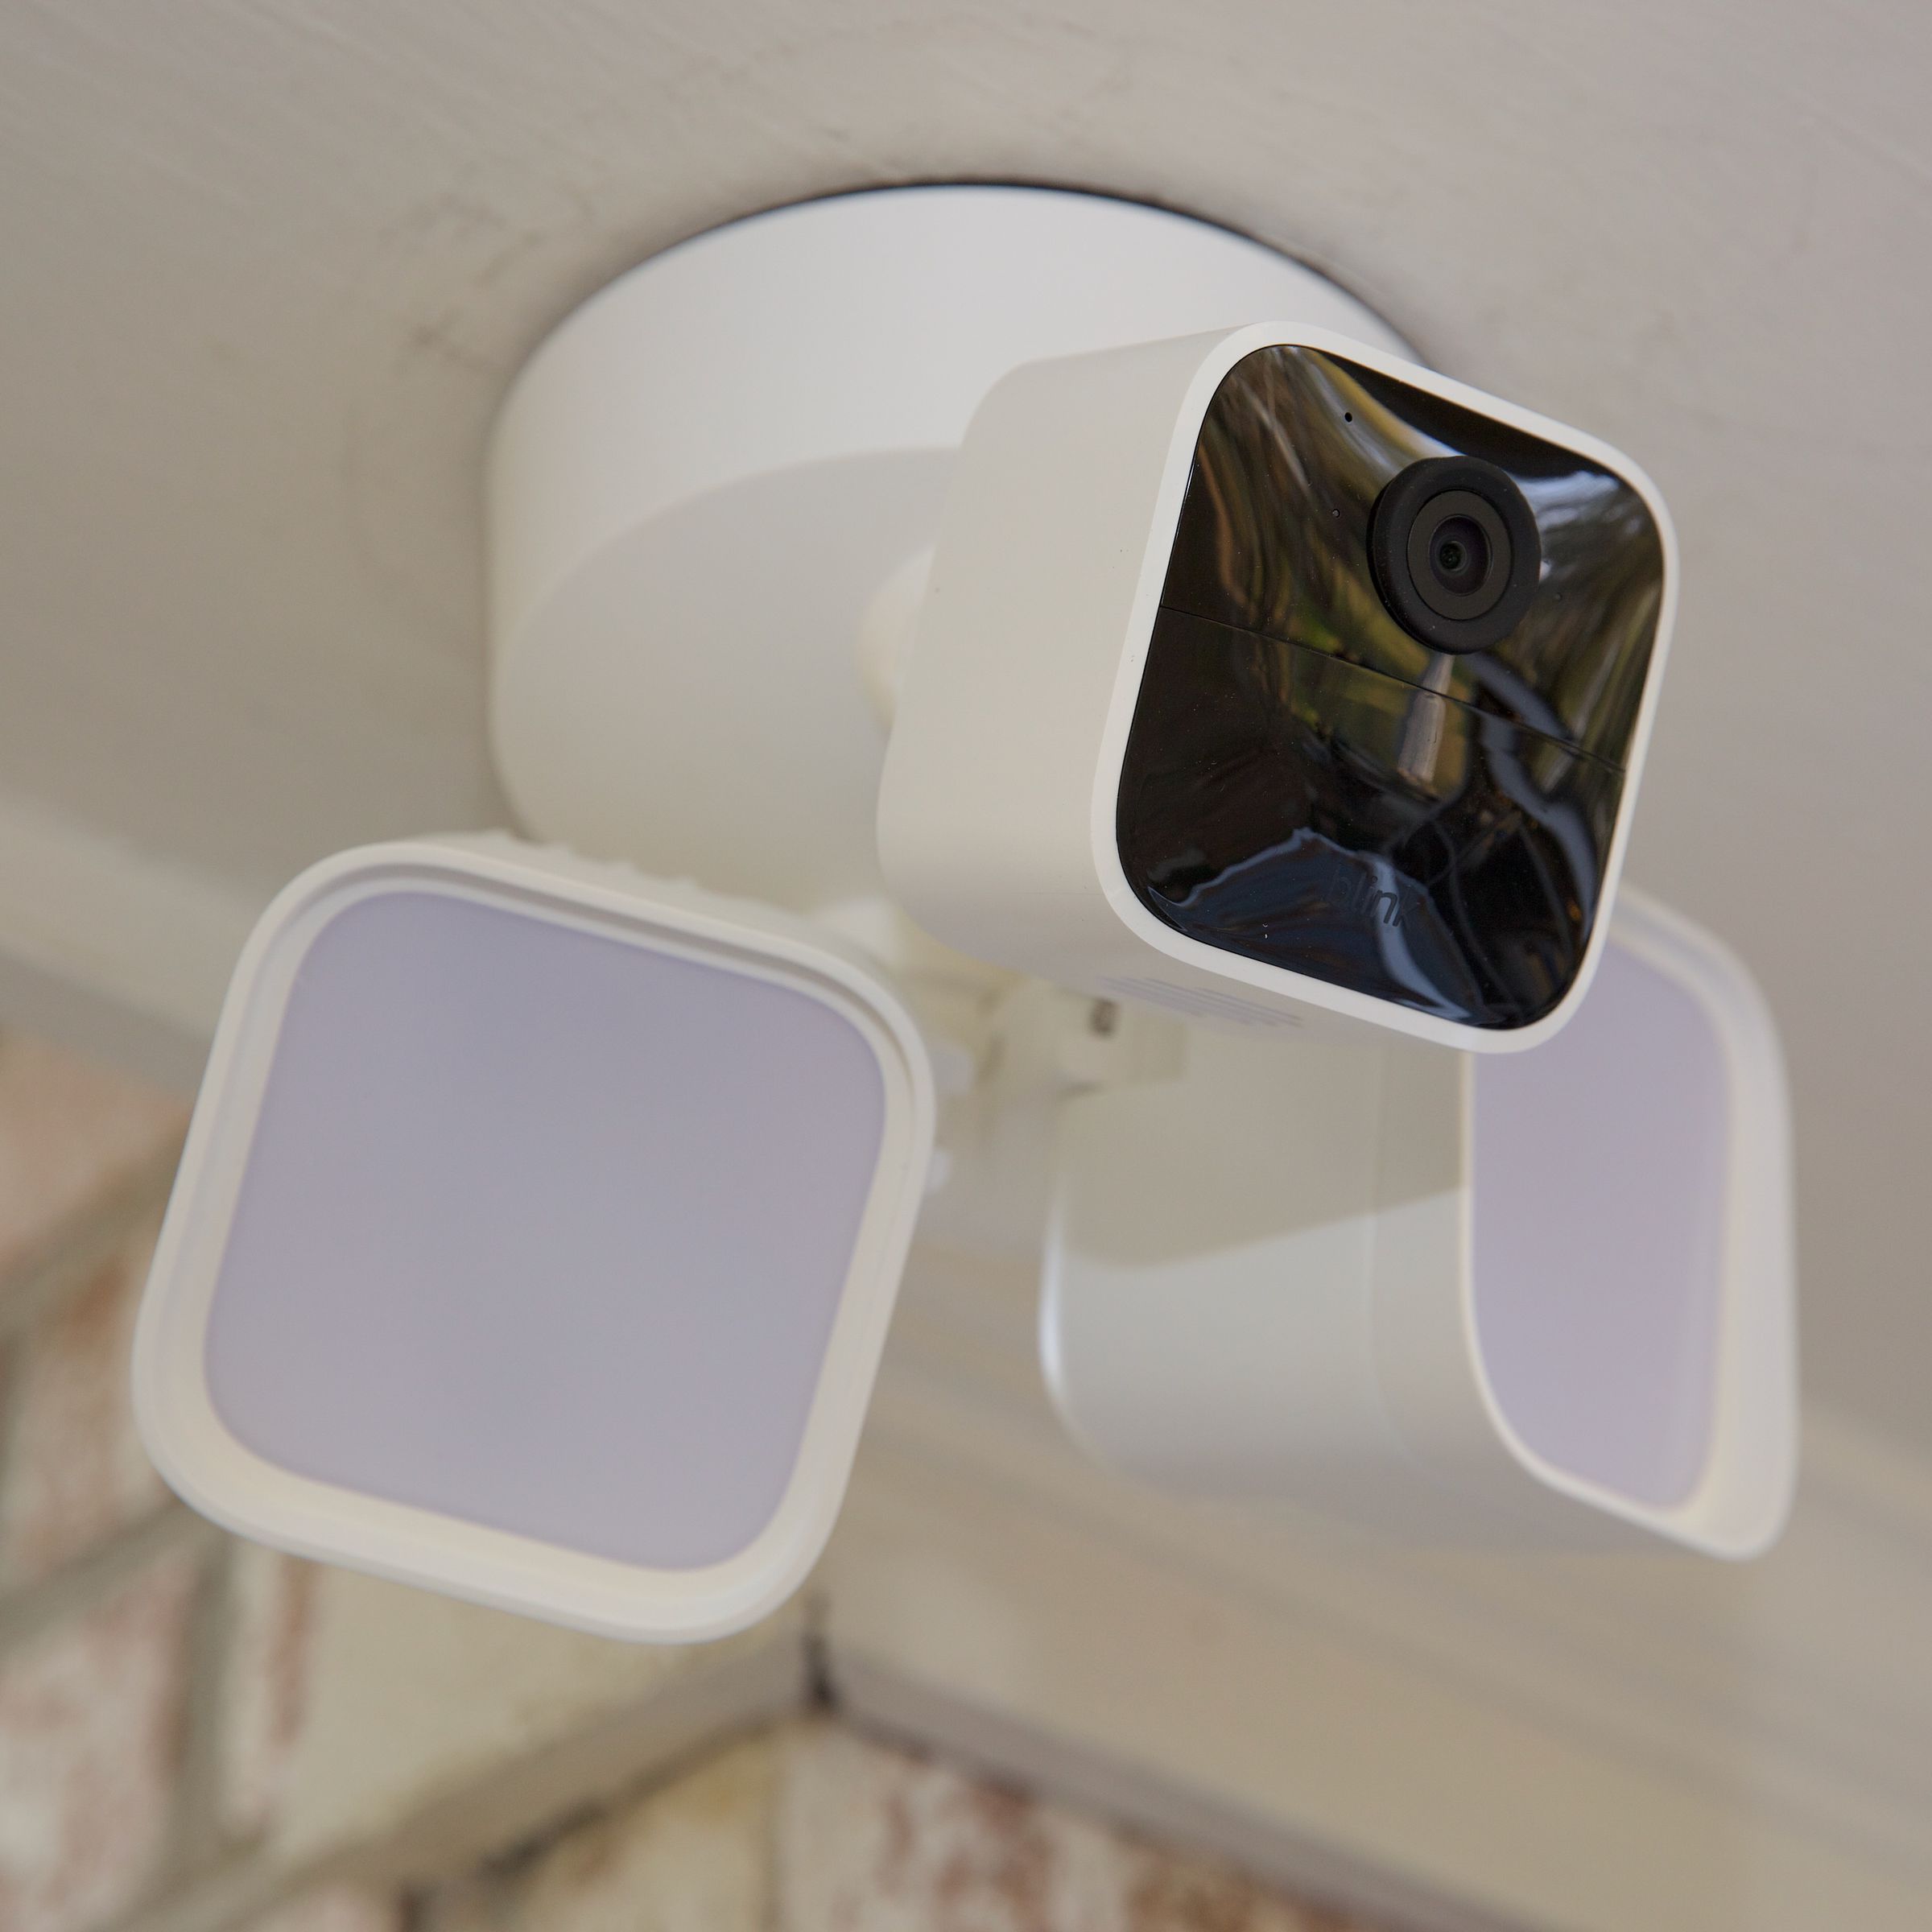 Blink’s Wired Floodlight Camera mounted up on a porch.